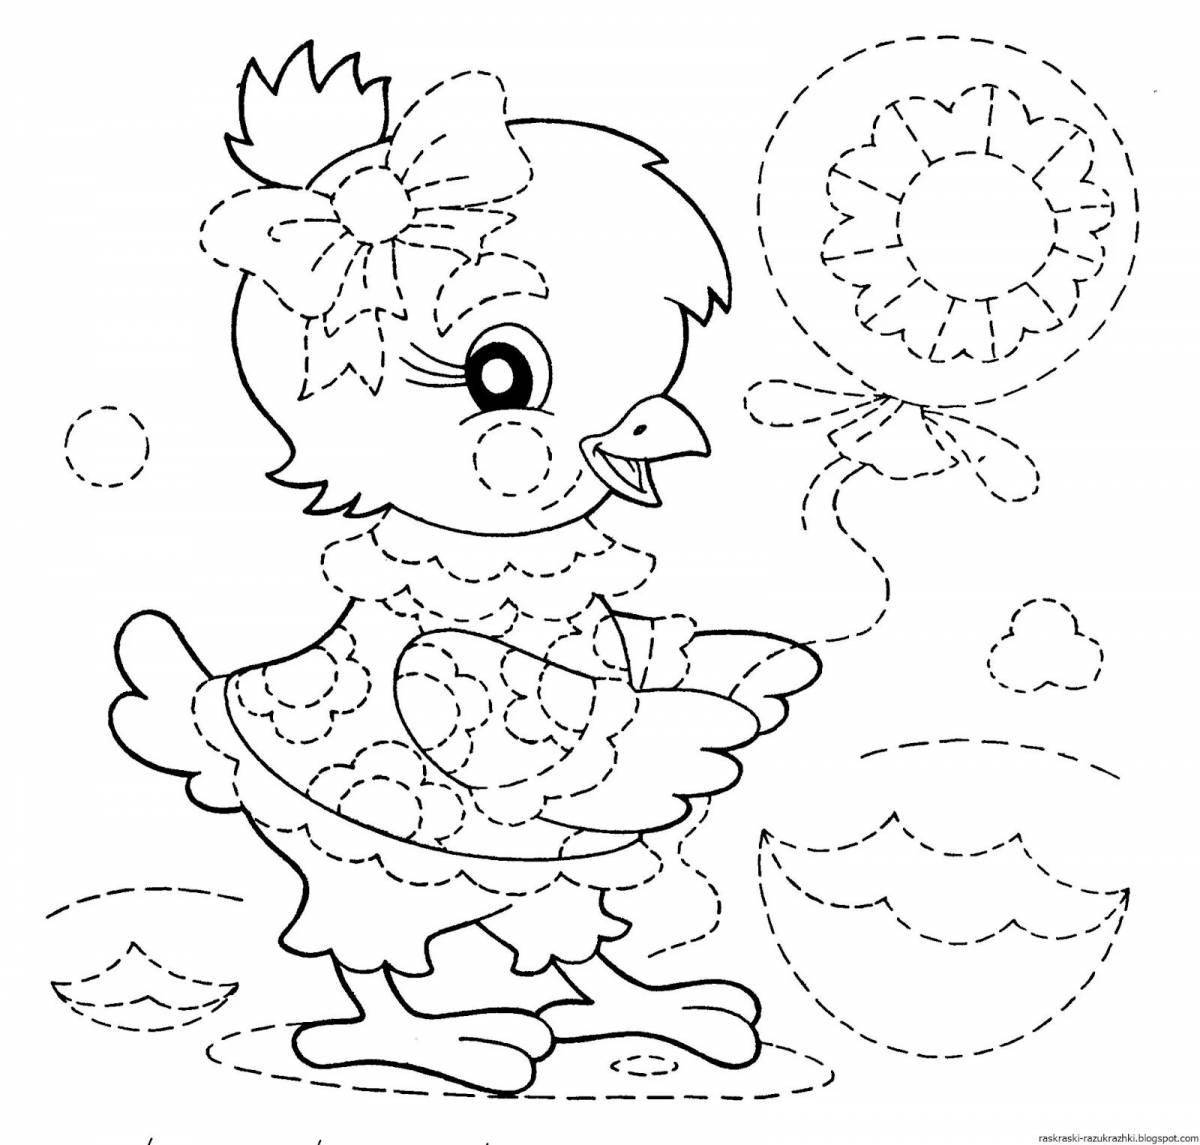 Adorable dotted line coloring book for kids